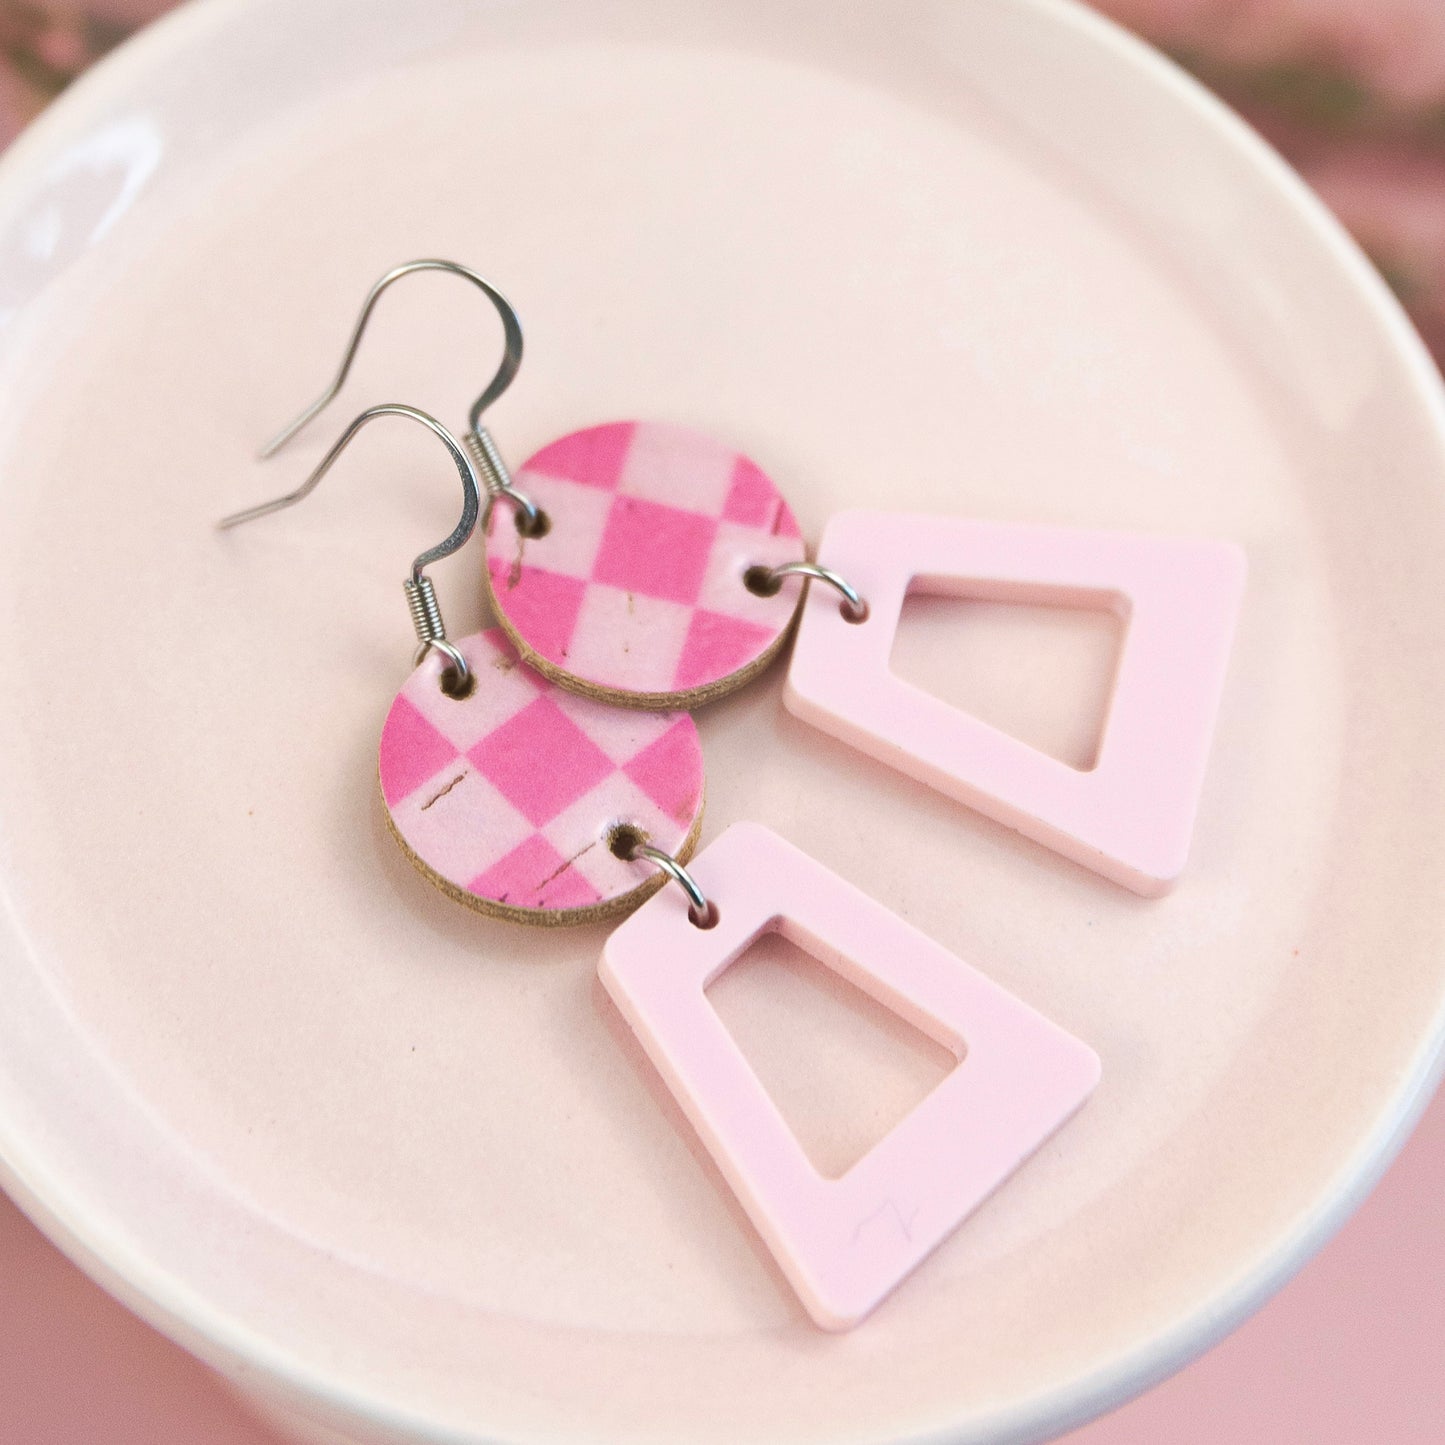 THE JANE in Pink Checkerboard/ Lightweight Leather Statement Earrings